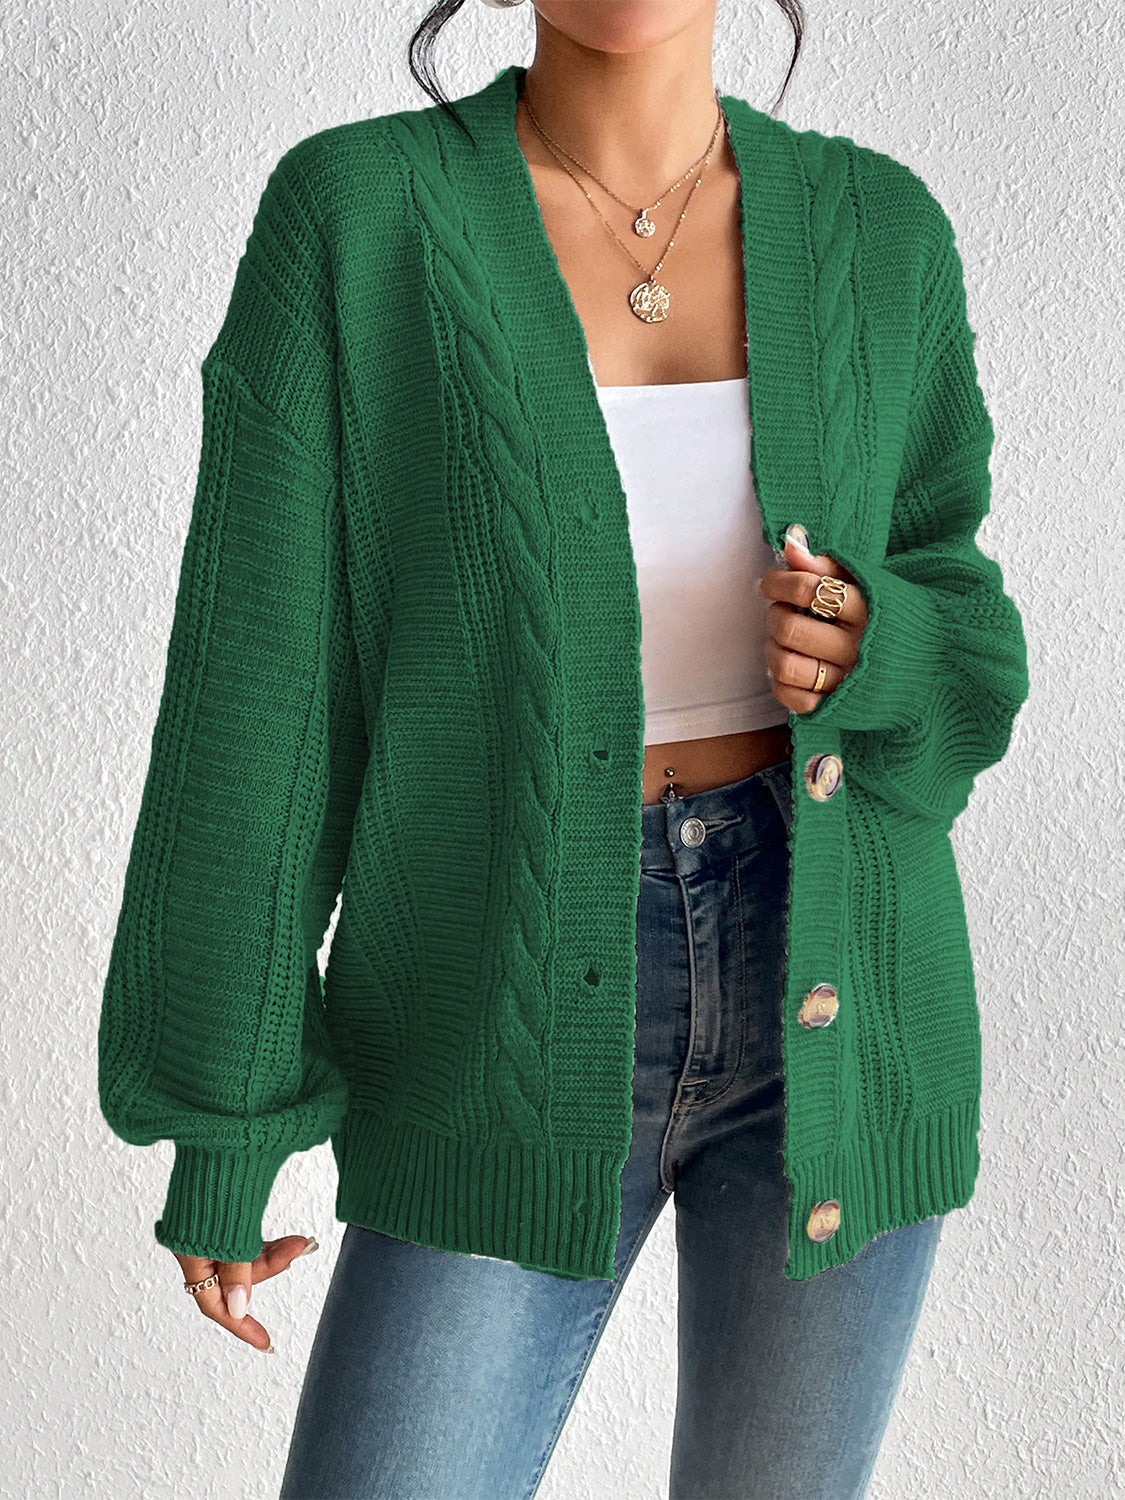 Cable-Knit Button Down Cardigan - Green / S - Women’s Clothing & Accessories - Shirts & Tops - 16 - 2024